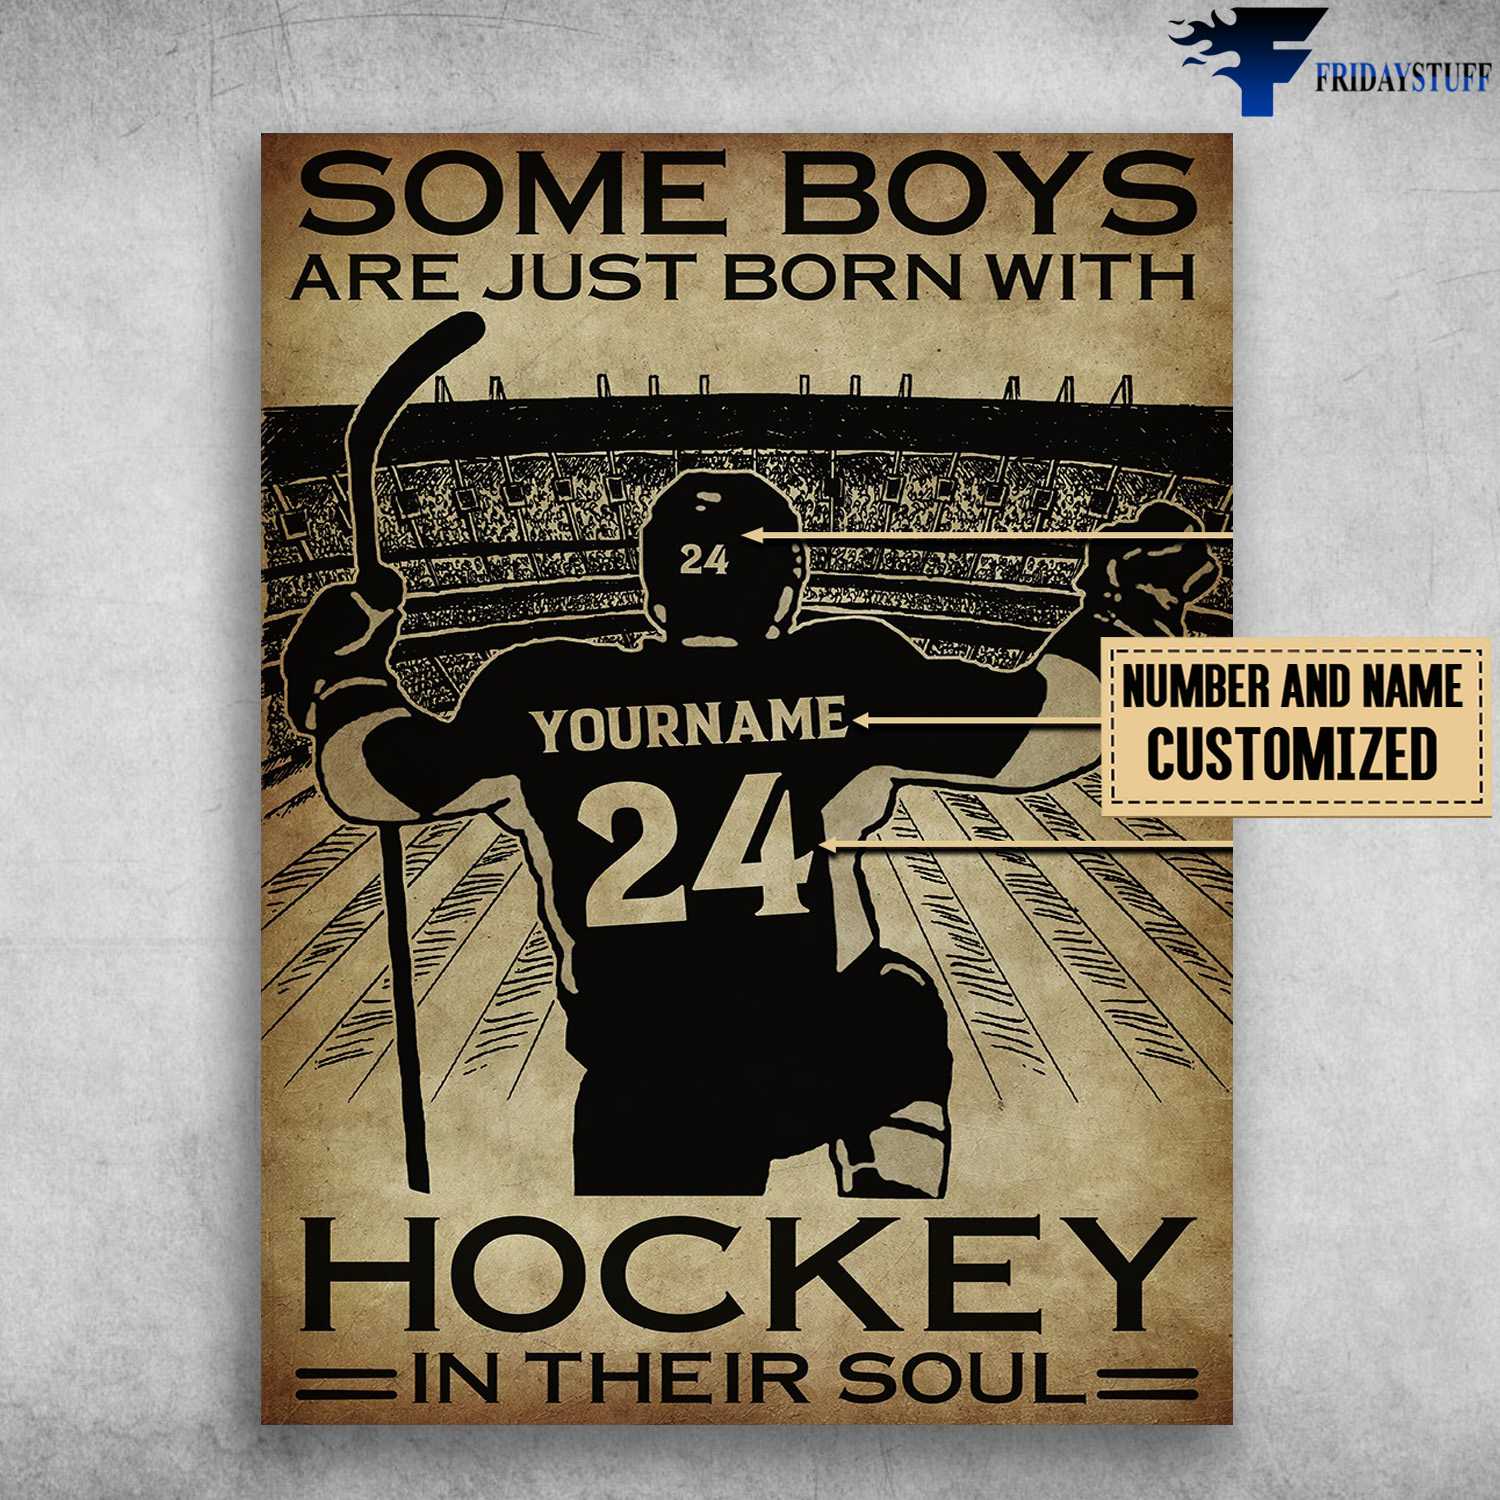 Hockey Player, Hockey Lover, Some Boys Are Just Born With, Hockey In Their Soul